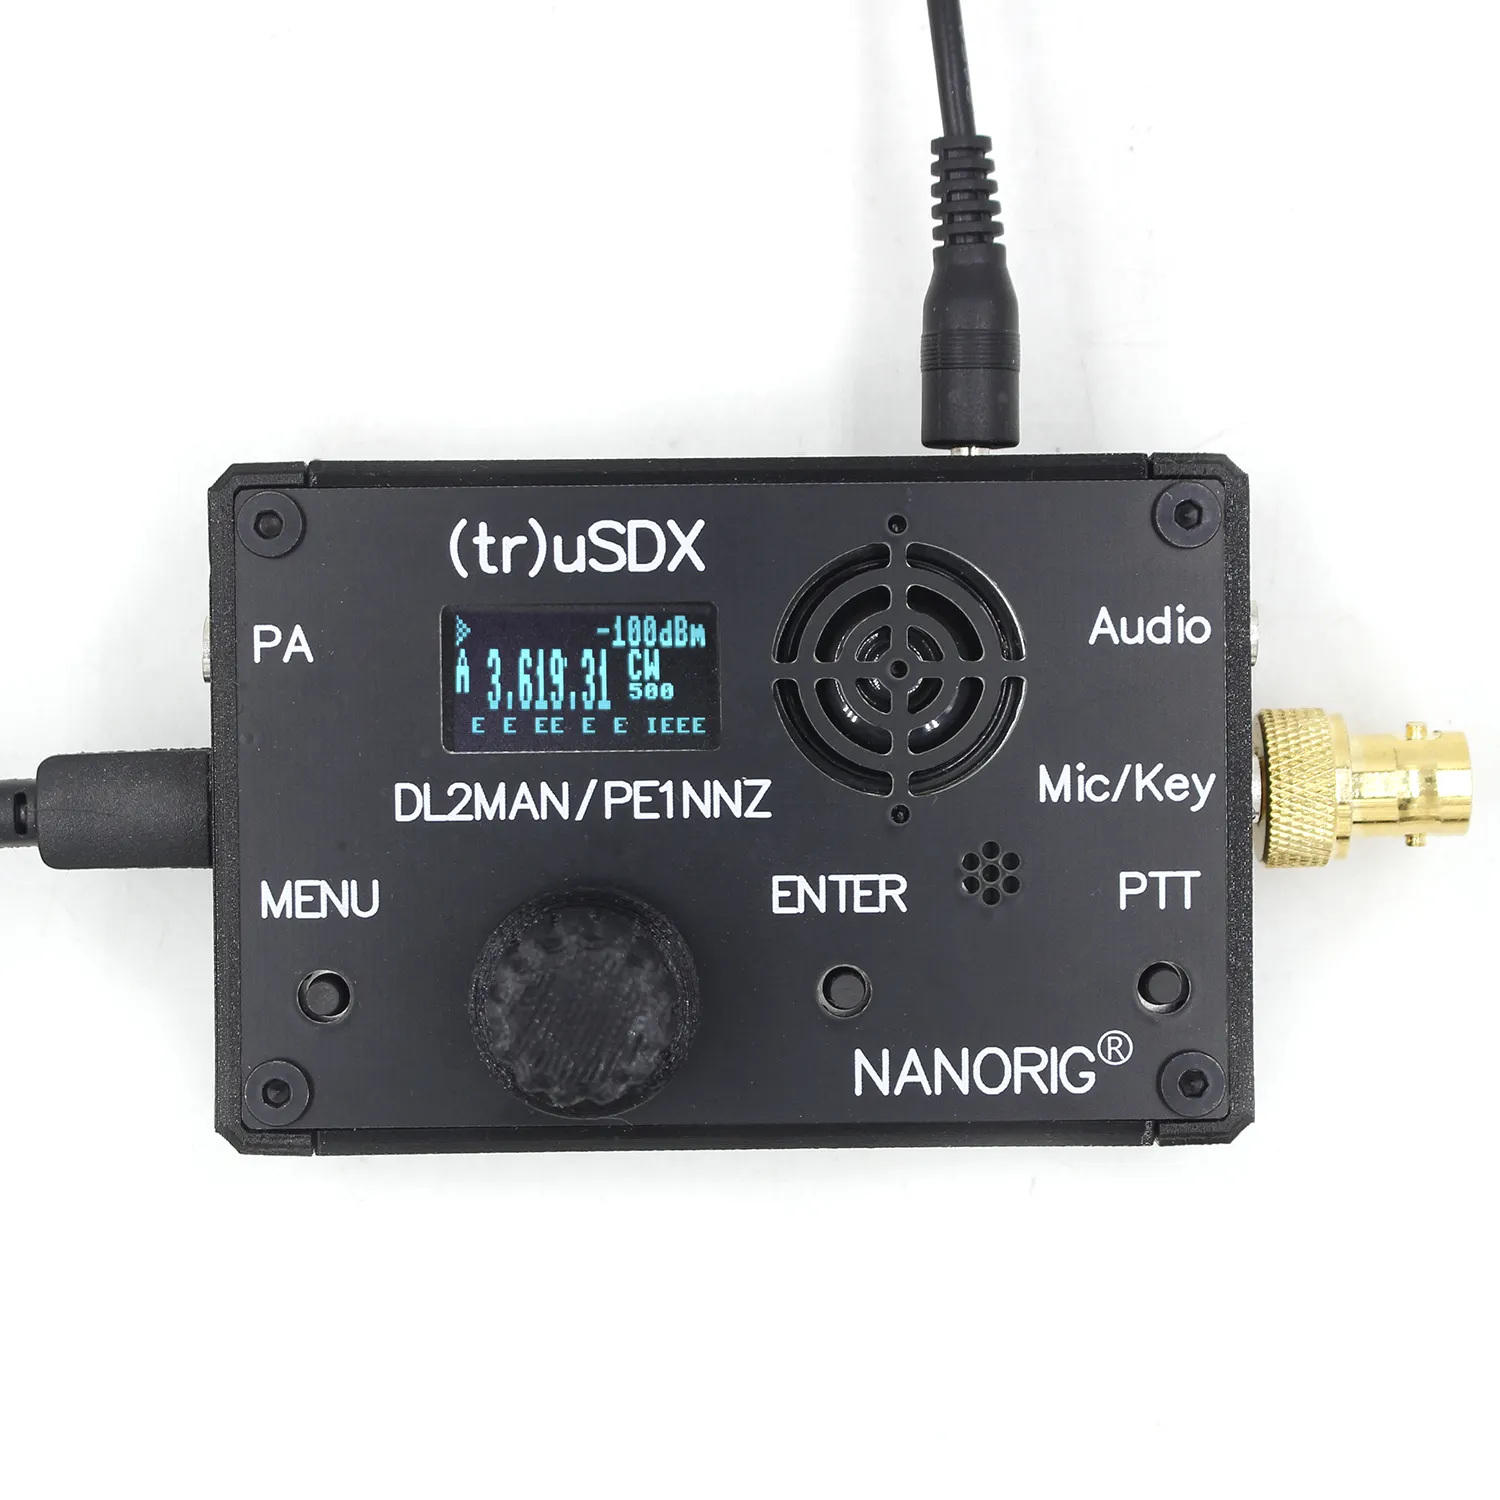 Upgraded (tr)uSDX usdx Transceiver 5-band Multimode CW LSB USB AM FM QRP Transceiver with Case PE1NNZ and DL2MAN